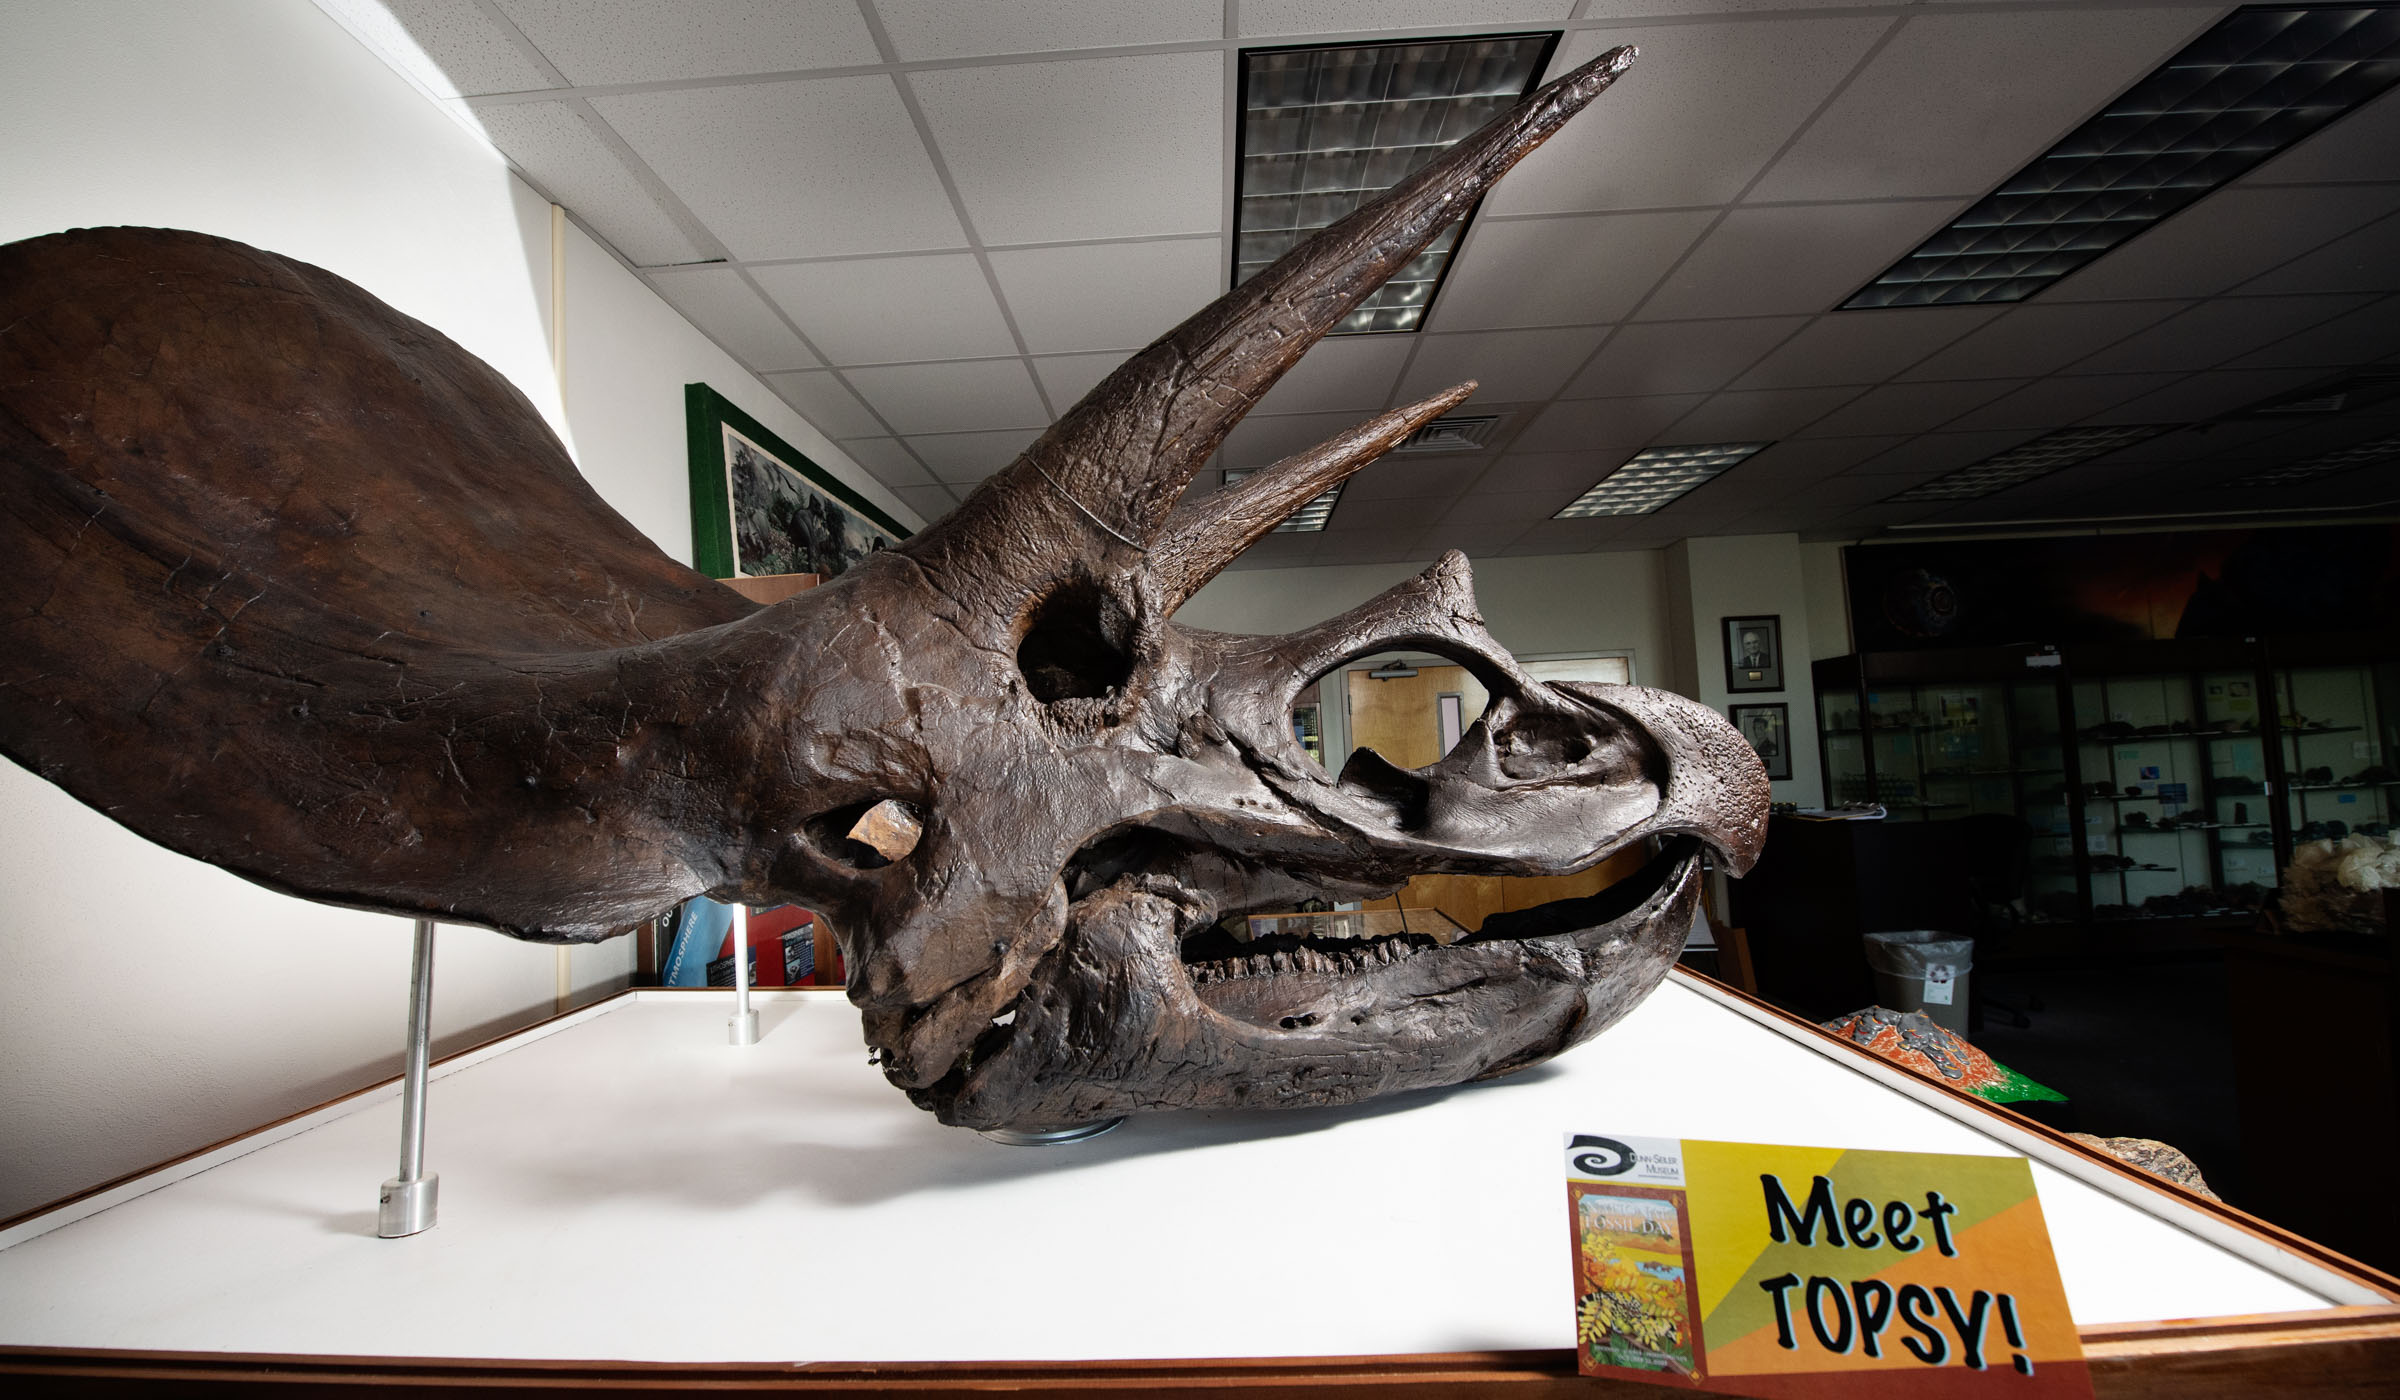 The new &quot;Topsy&quot; name plate is displayed in the foreground of the Triceratops scull cast, which has long been a central focus of the Dunn-Seiler Museum&#039;s public gallery.